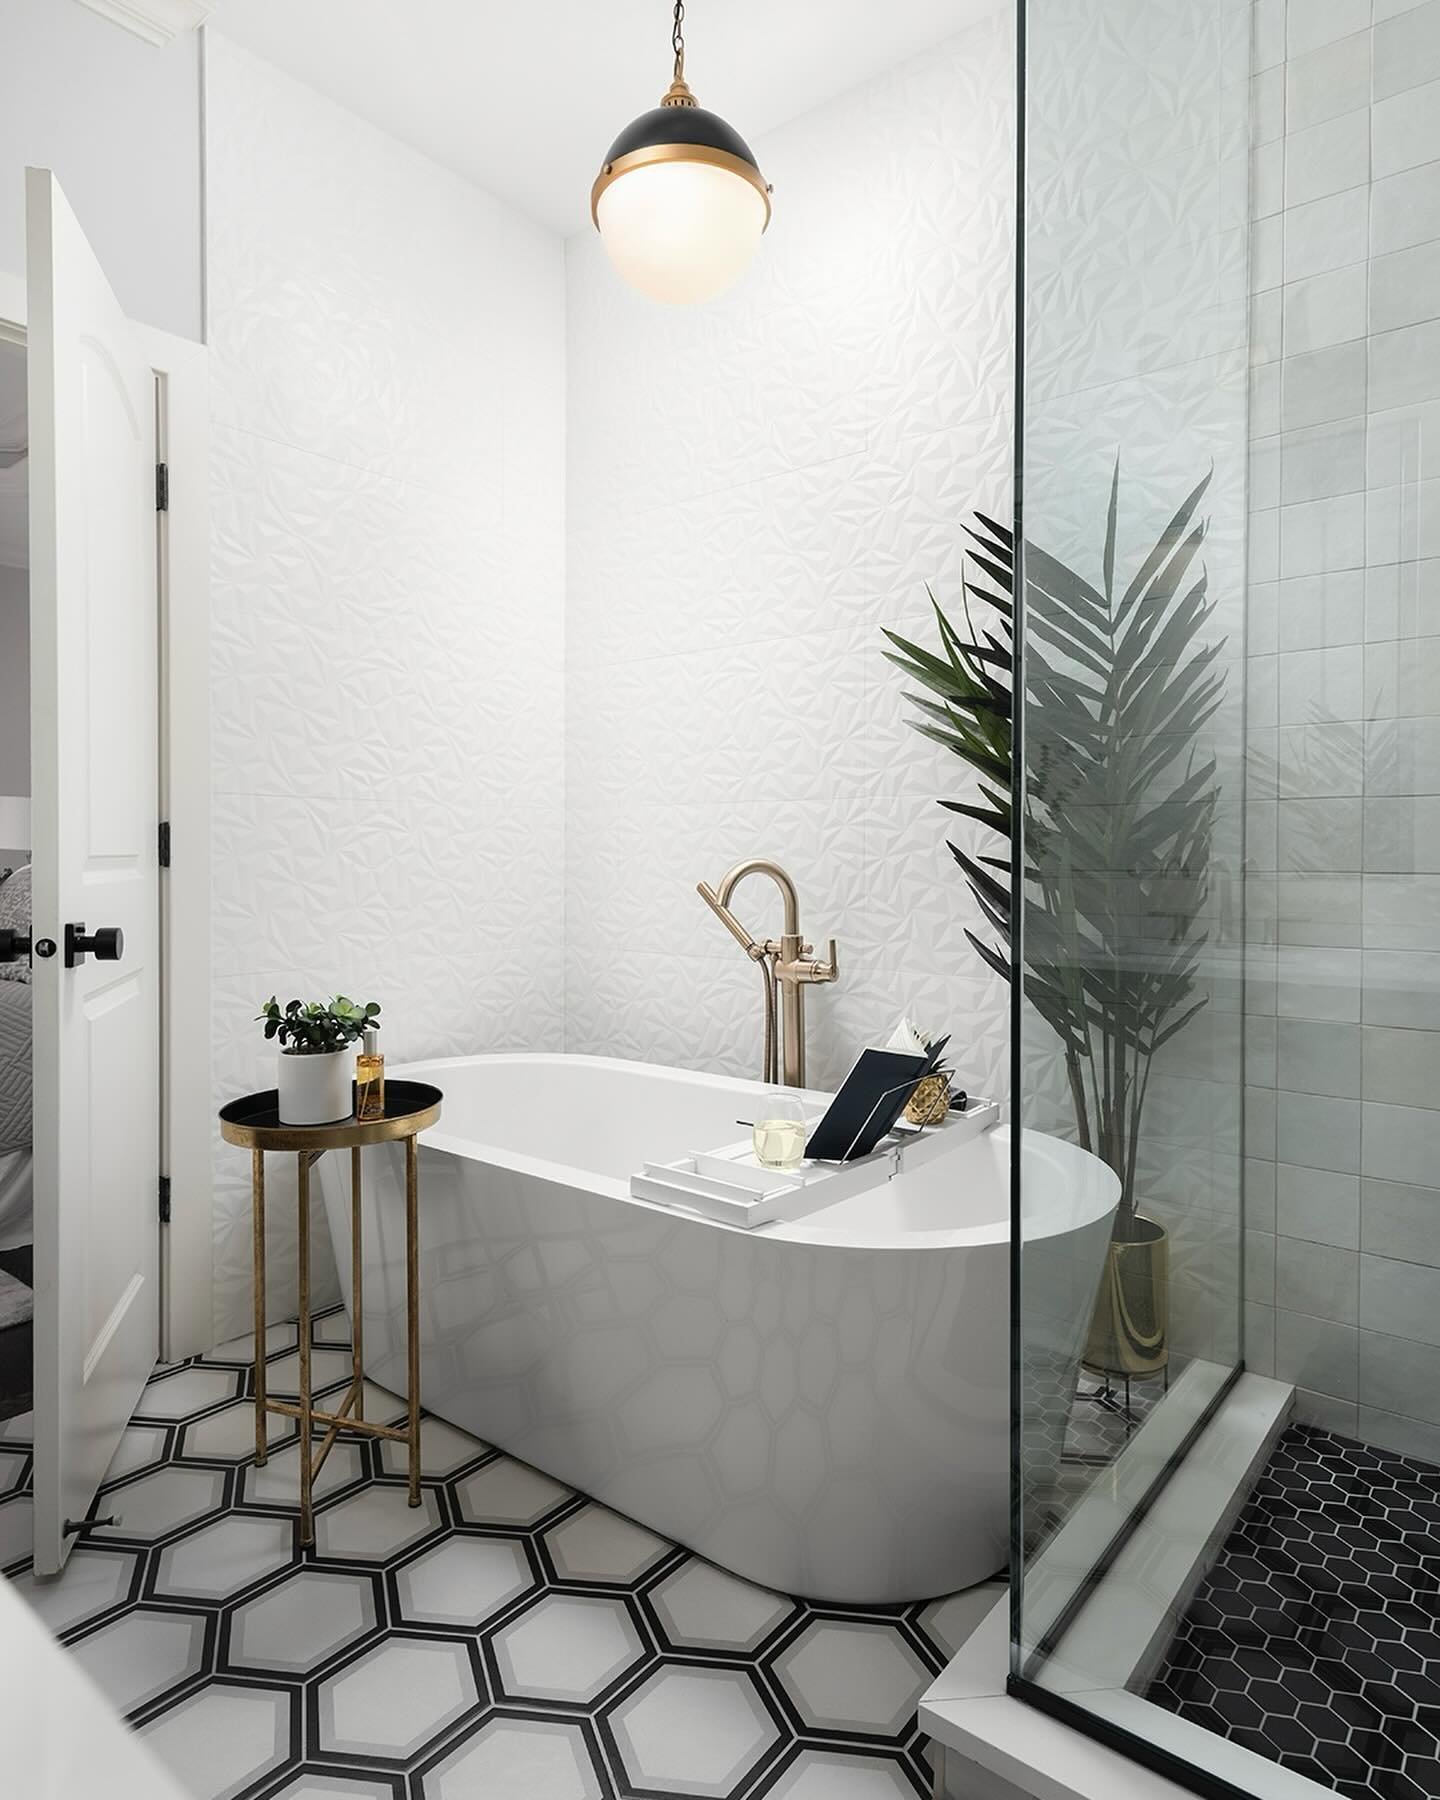 Ease into the week with a nice little soak.

#cedCozyConfines
Photos by @pictureperfecthouse